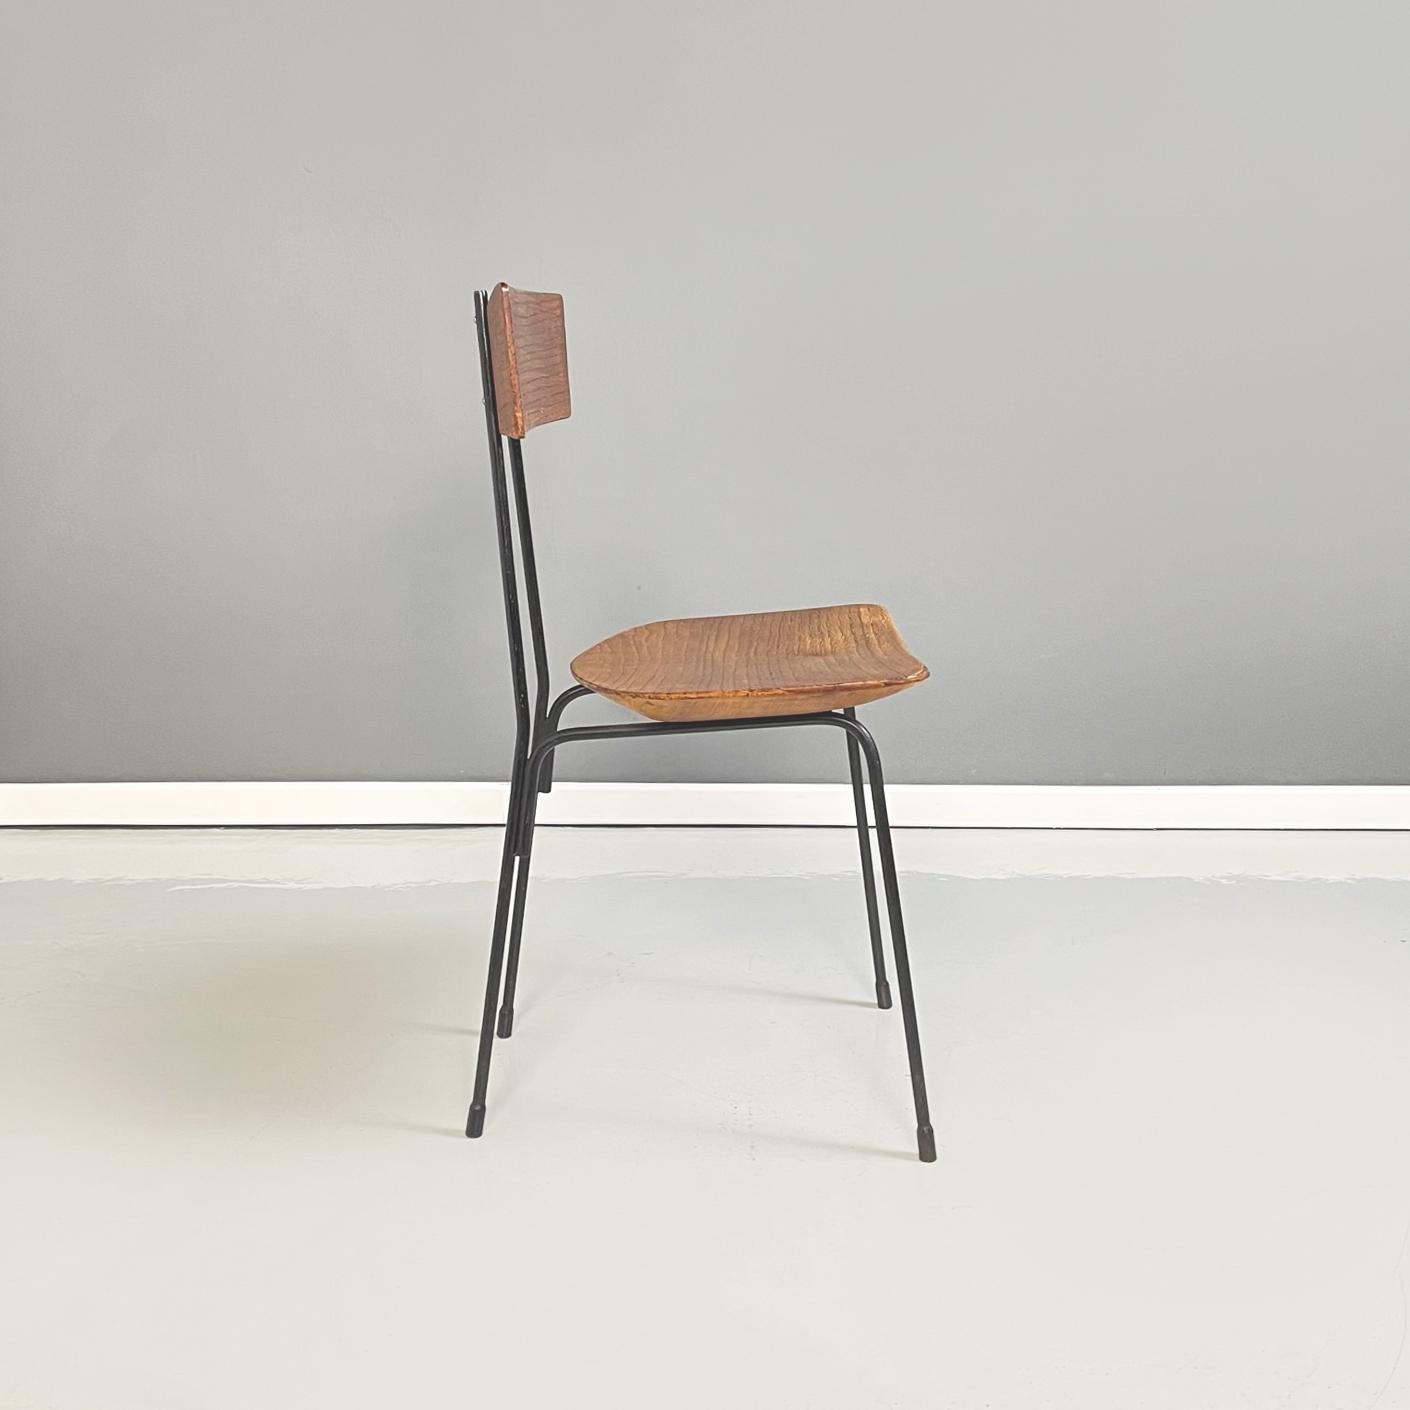 Mid-Century Modern Italian Mid-Century Wooden and Black Enamelled Metal Rod Chair, 1950s For Sale